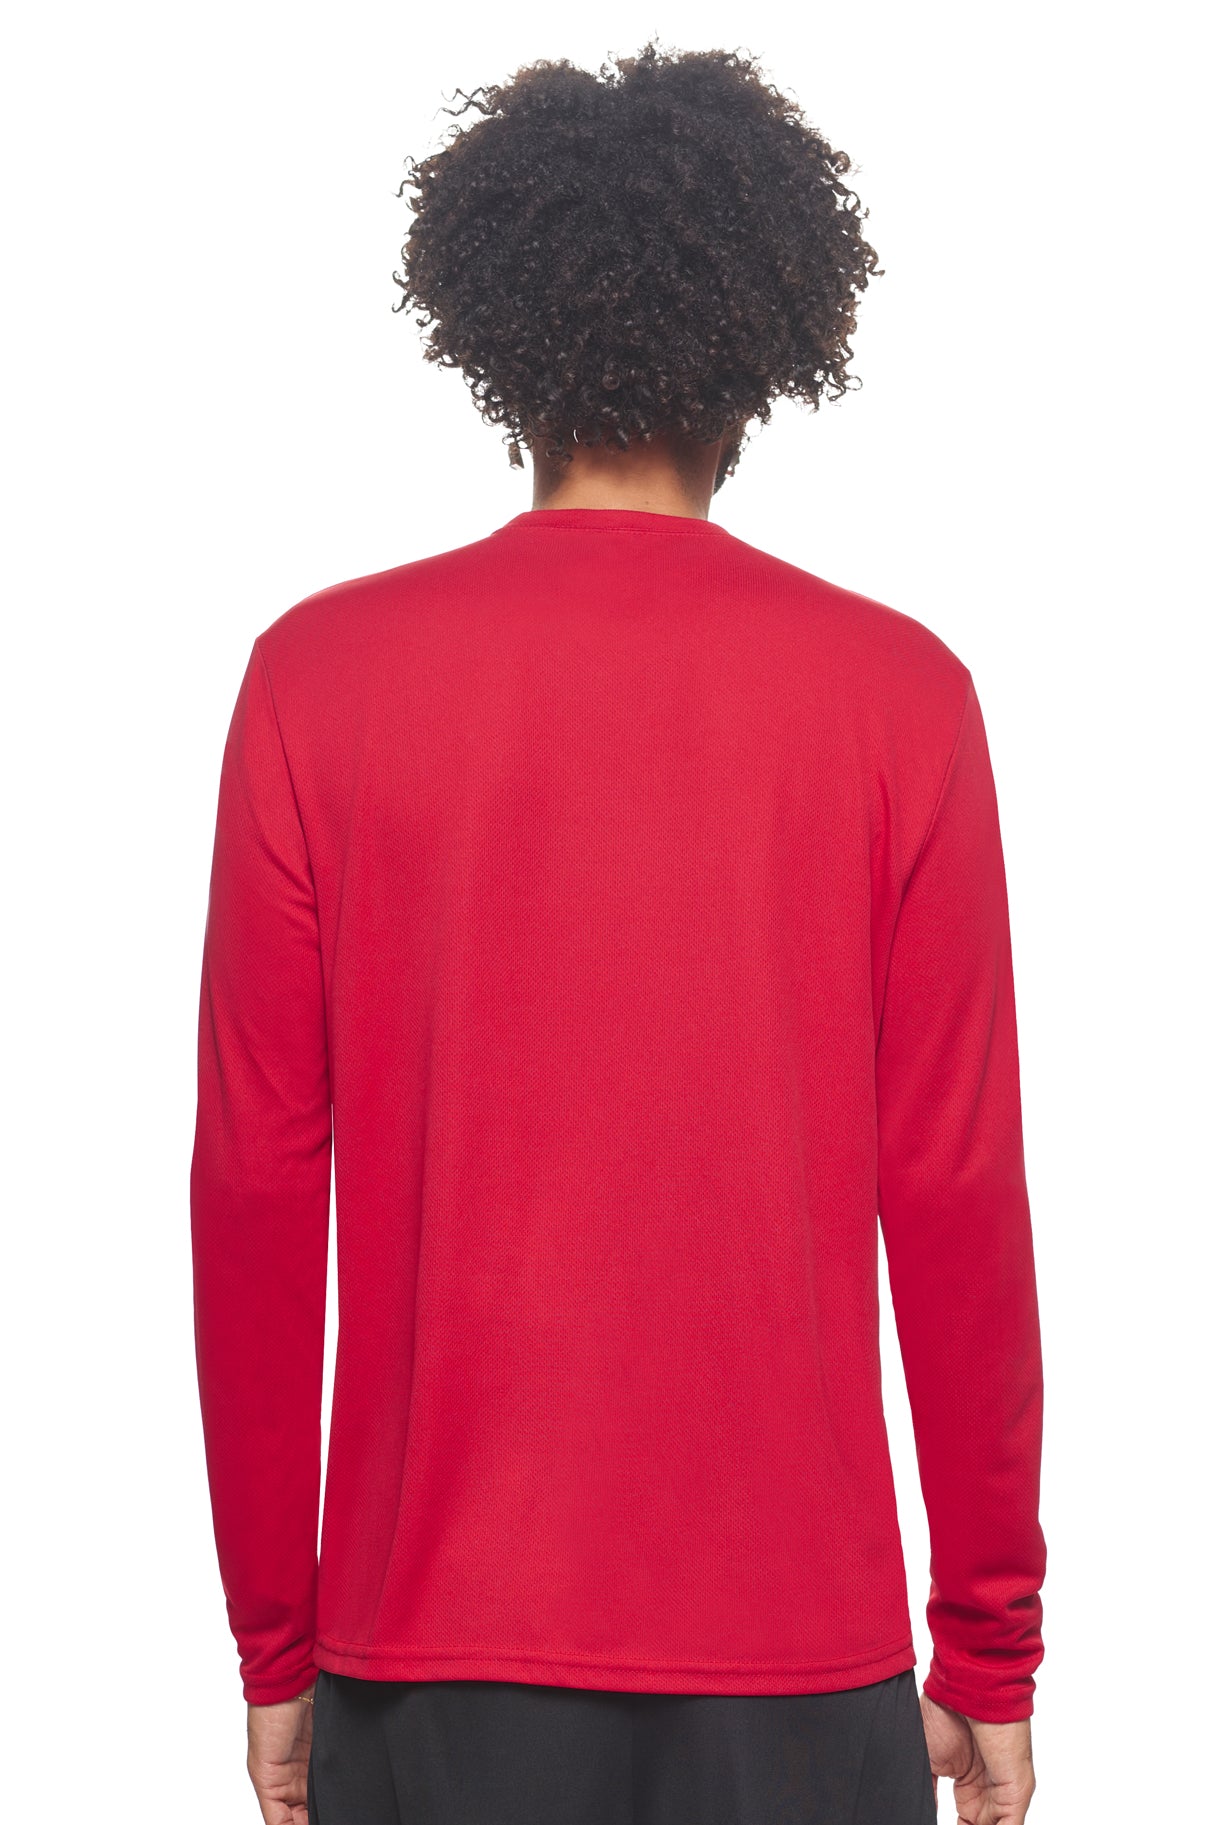 Expert Brand Retail Made in USA sportswear activewear long sleeve tec tee oxymesh crewneck red 3#color_true-red